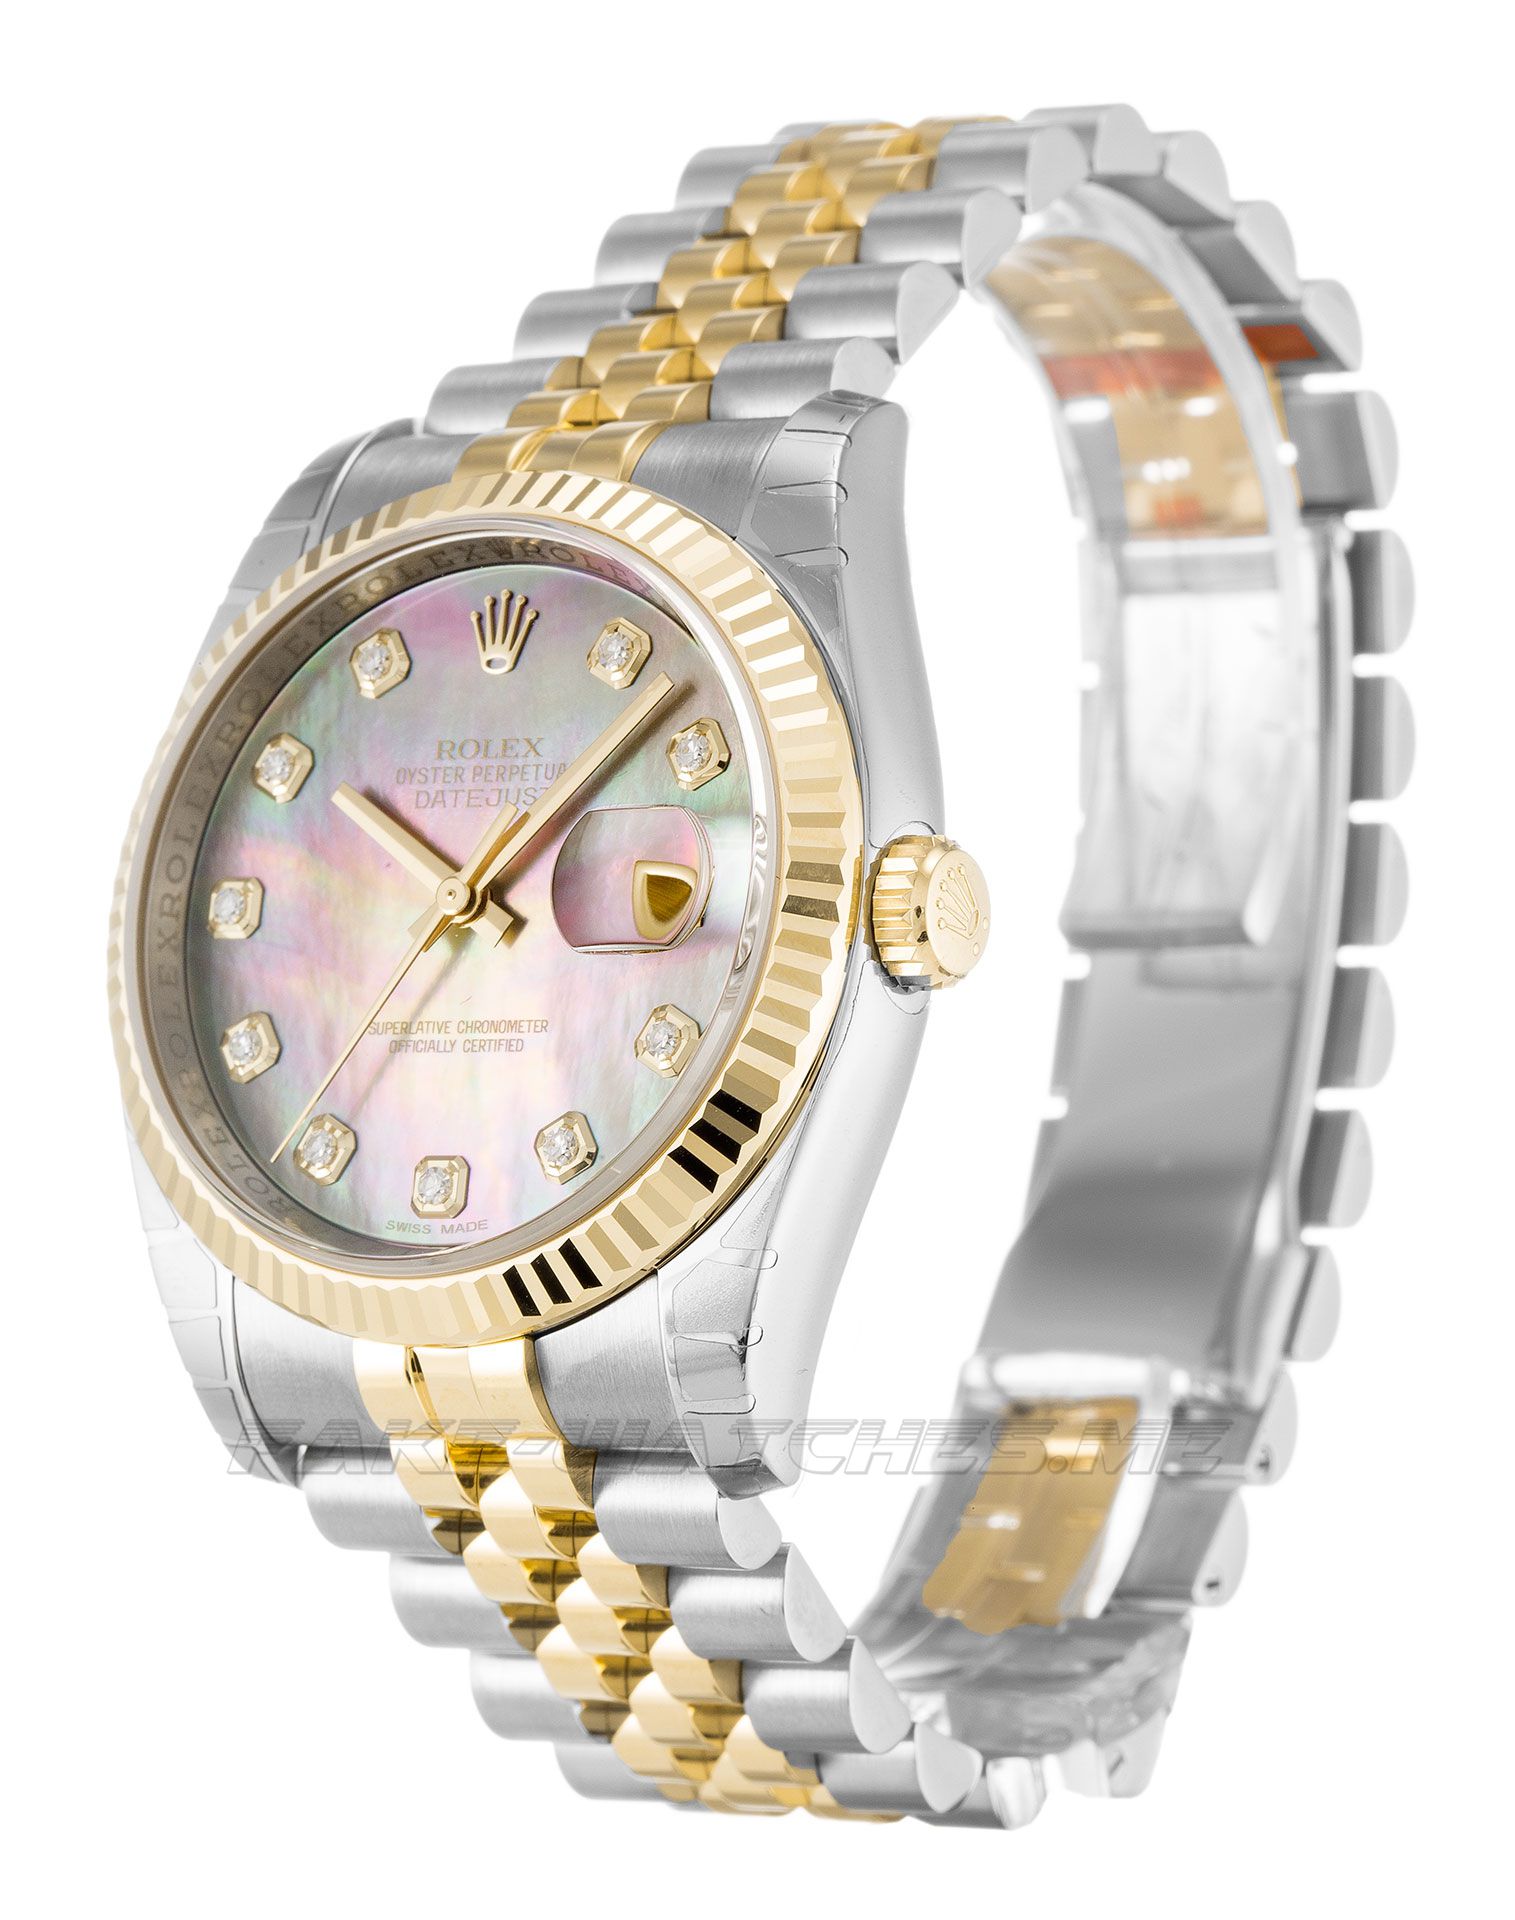 Rolex Datejust Mother of Pearl Unisex Automatic 116233